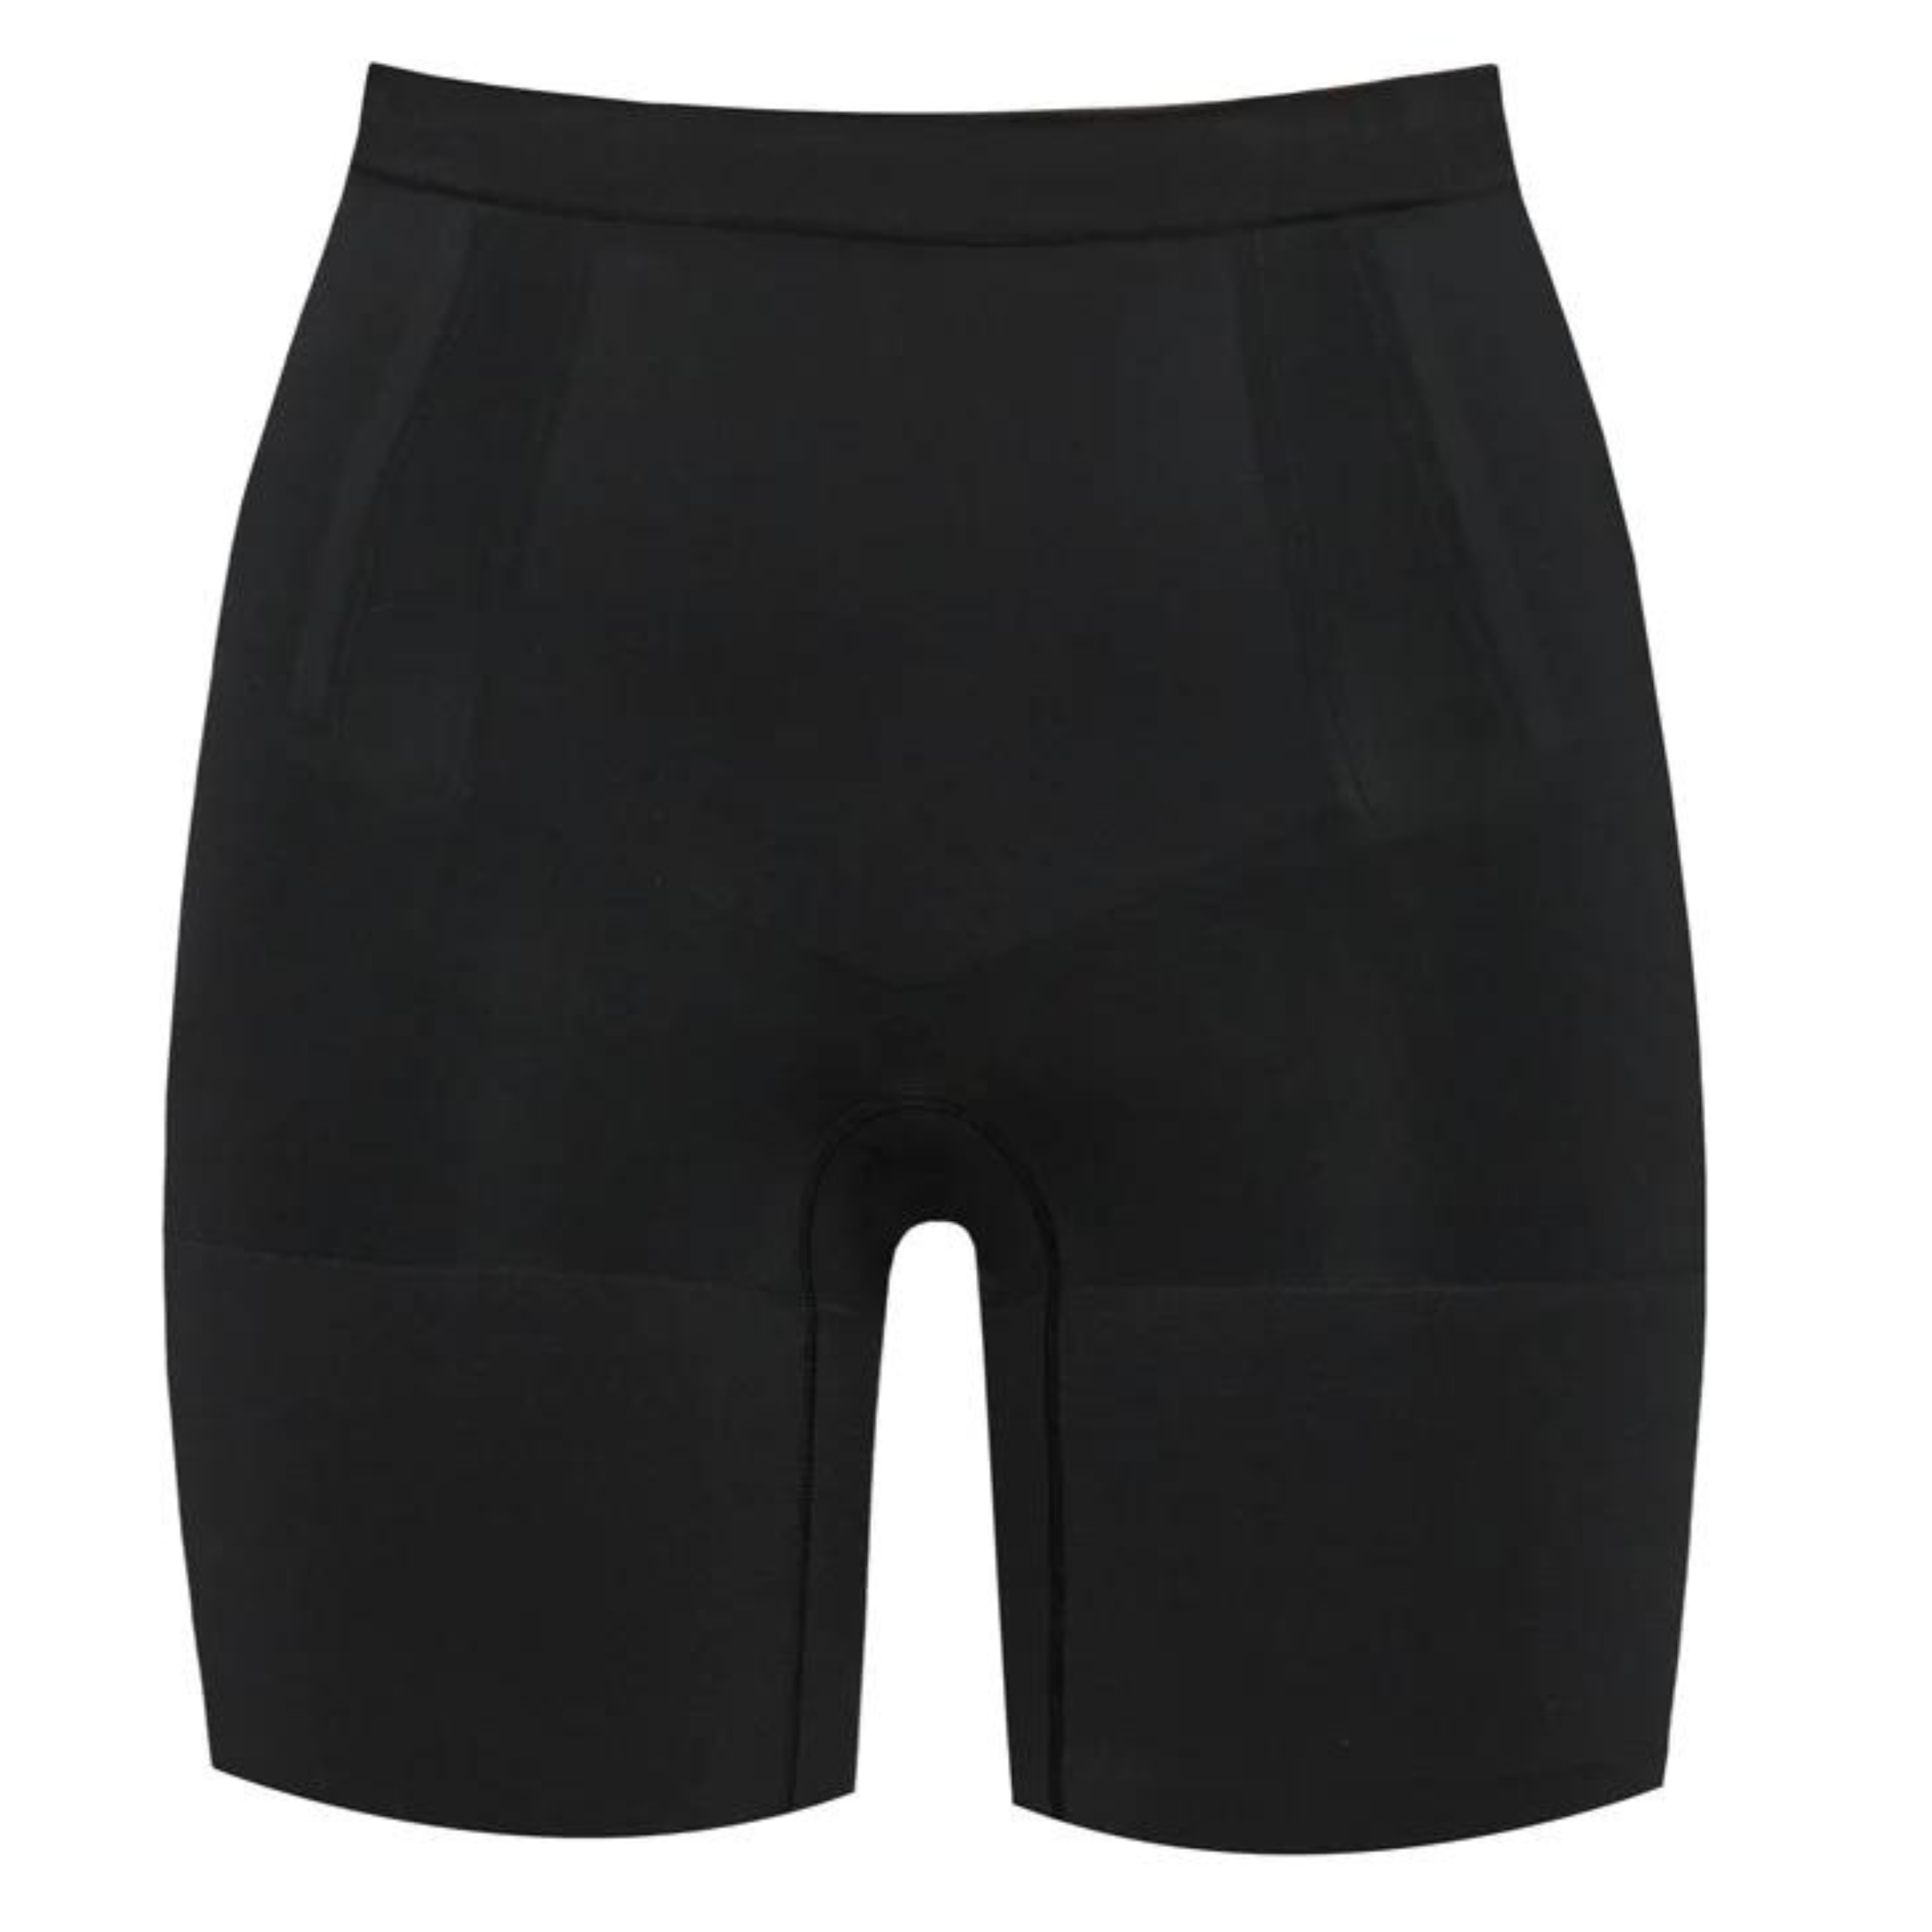 A pair of black mid-thigh shorts with high waist. Pictured on a white background.